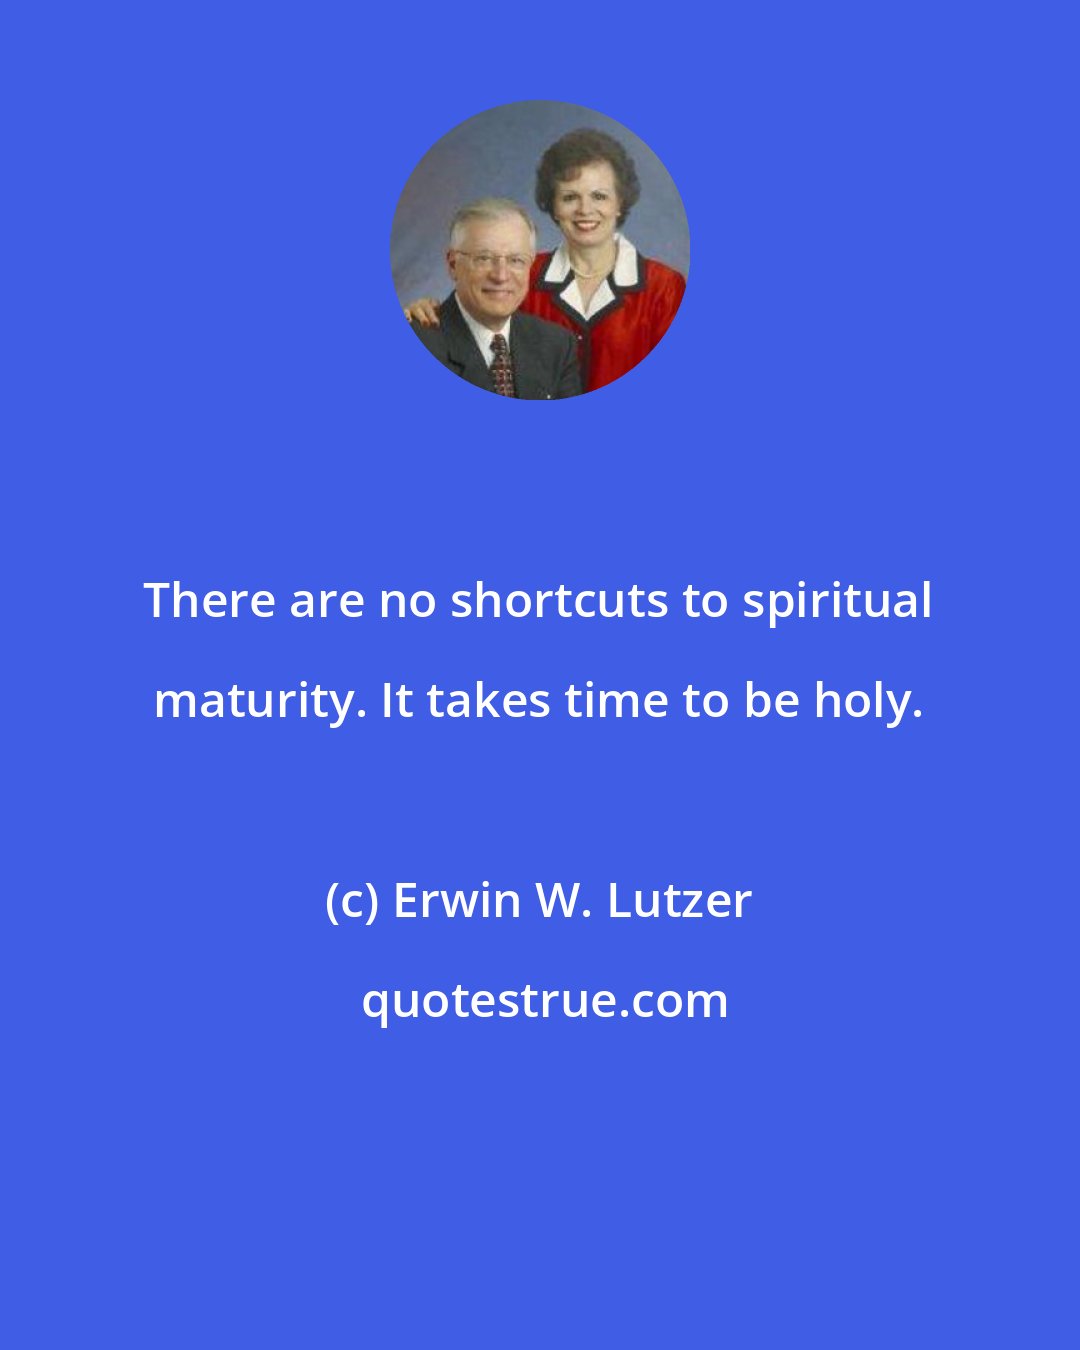 Erwin W. Lutzer: There are no shortcuts to spiritual maturity. It takes time to be holy.